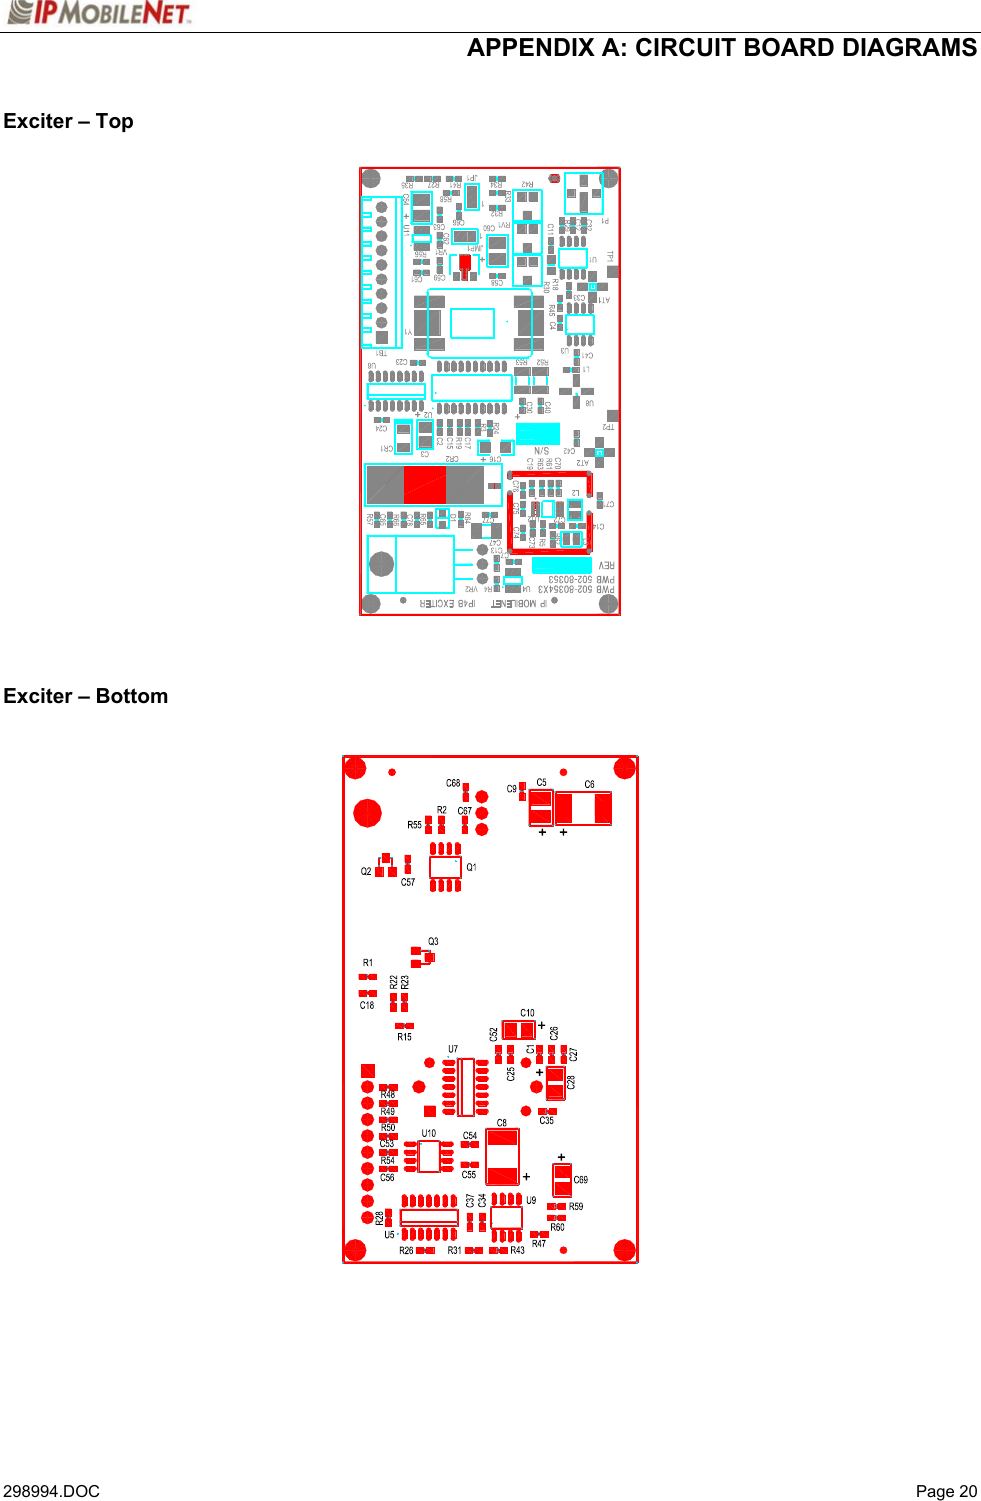  APPENDIX A: CIRCUIT BOARD DIAGRAMS   298994.DOC   Page 20 Exciter – Top                        Exciter – Bottom   